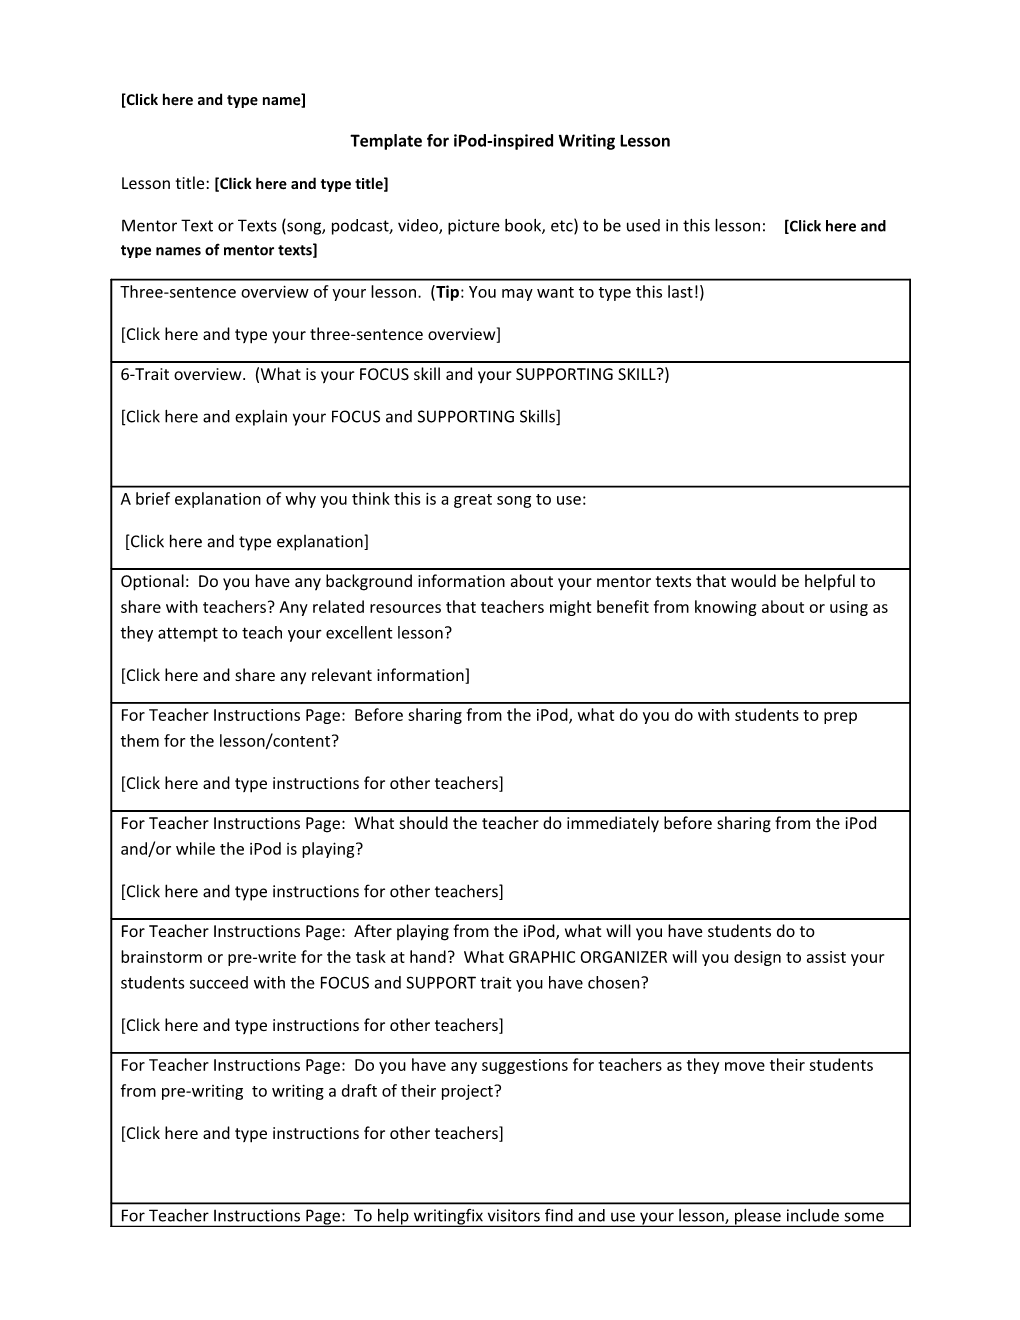 Template for Compare and Contrast Lesson